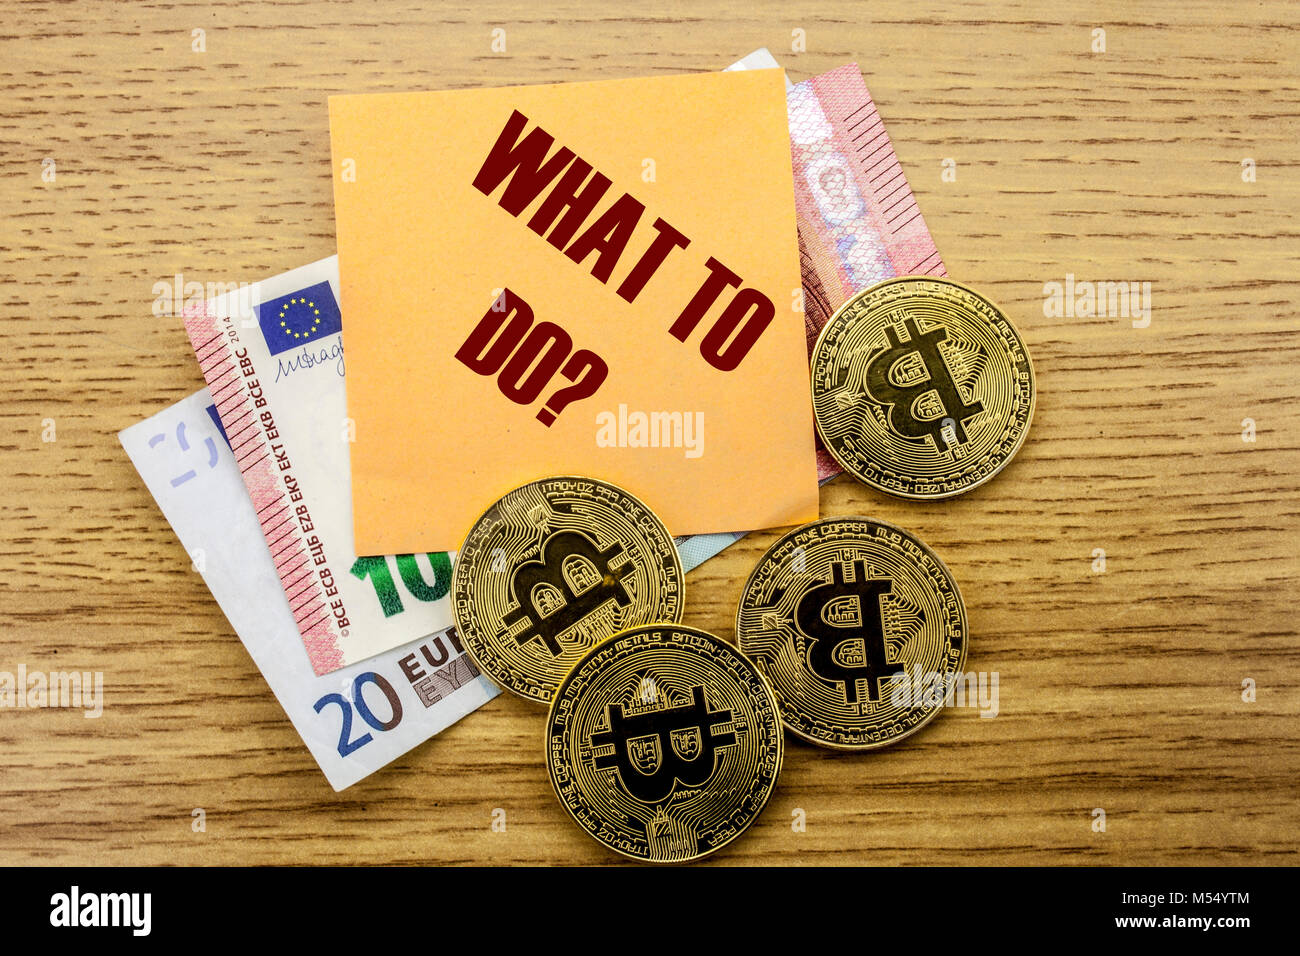 Bitcoins, Bit Coin on Euro, Dollars notes witch sticky note on wooden background, WHAT TO DO bitcoin concept. Stock Photo